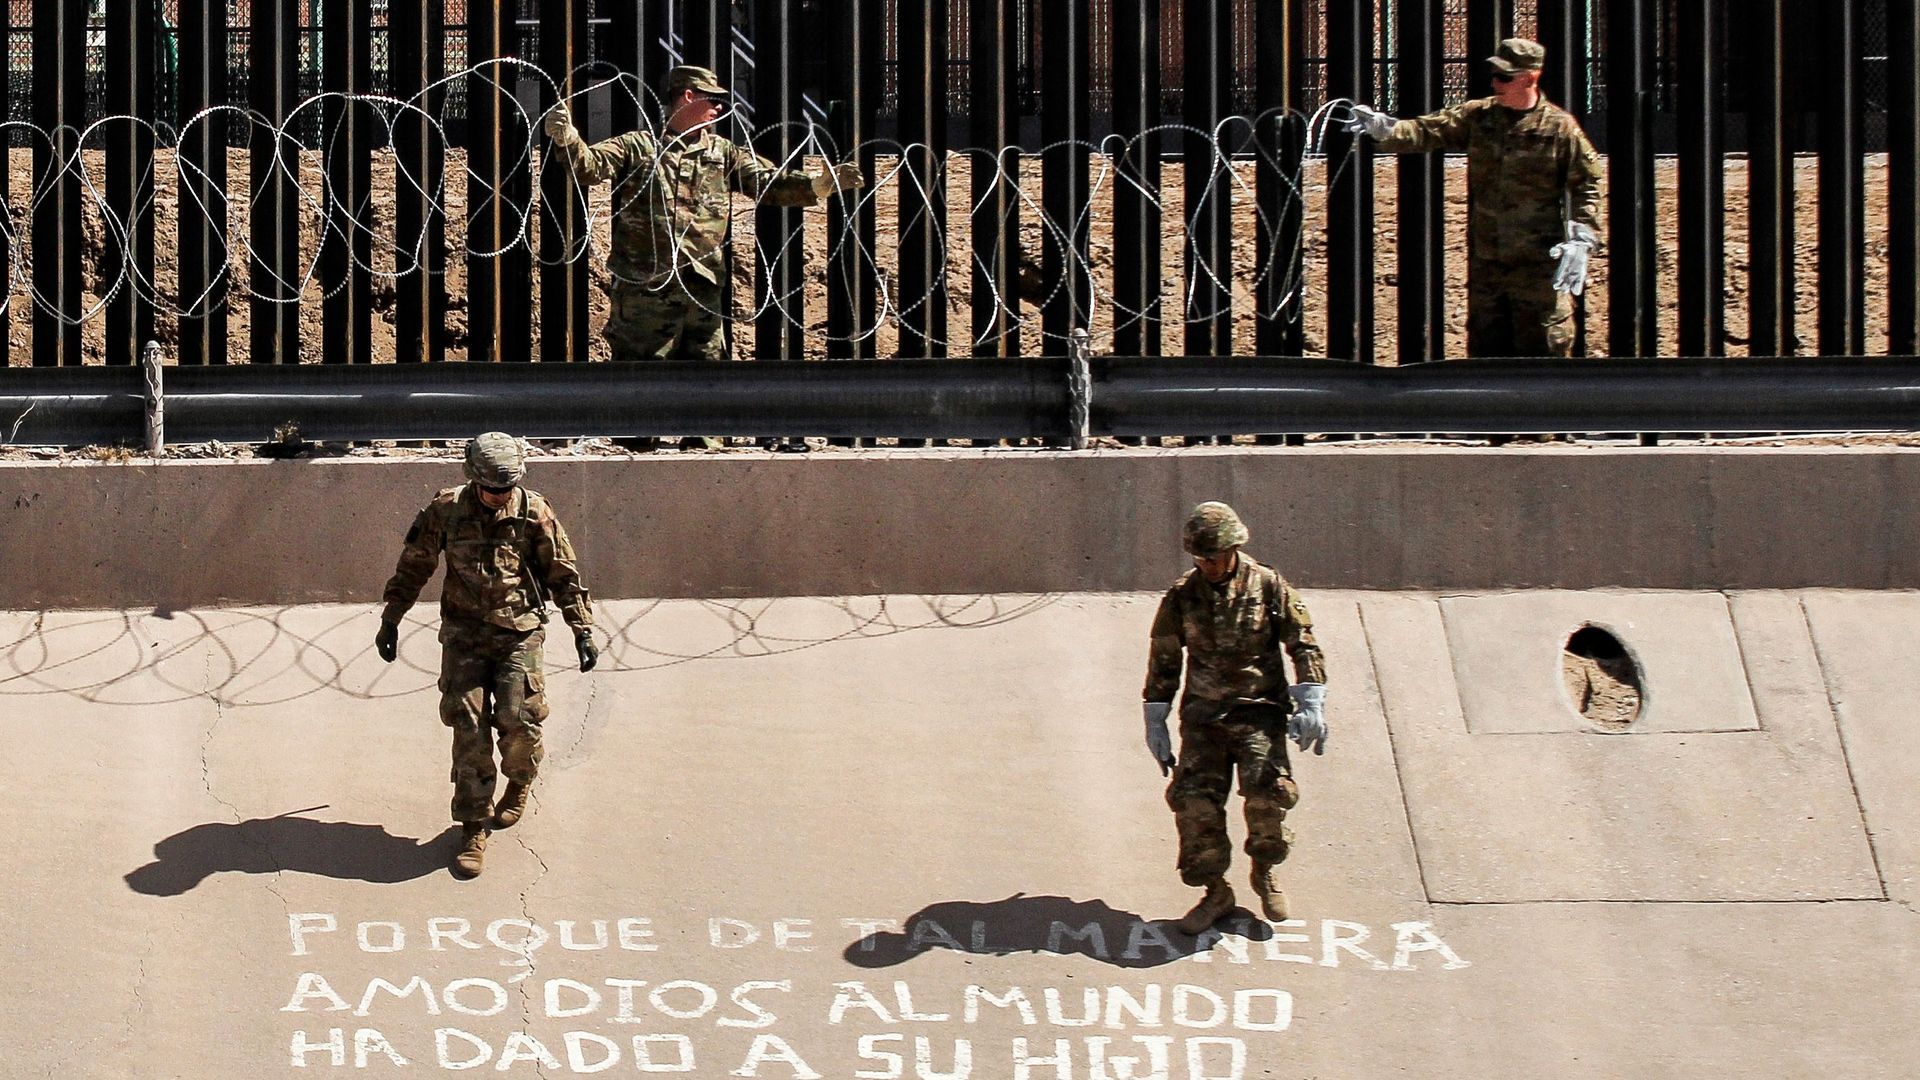 U.S. troops at the Southern border.